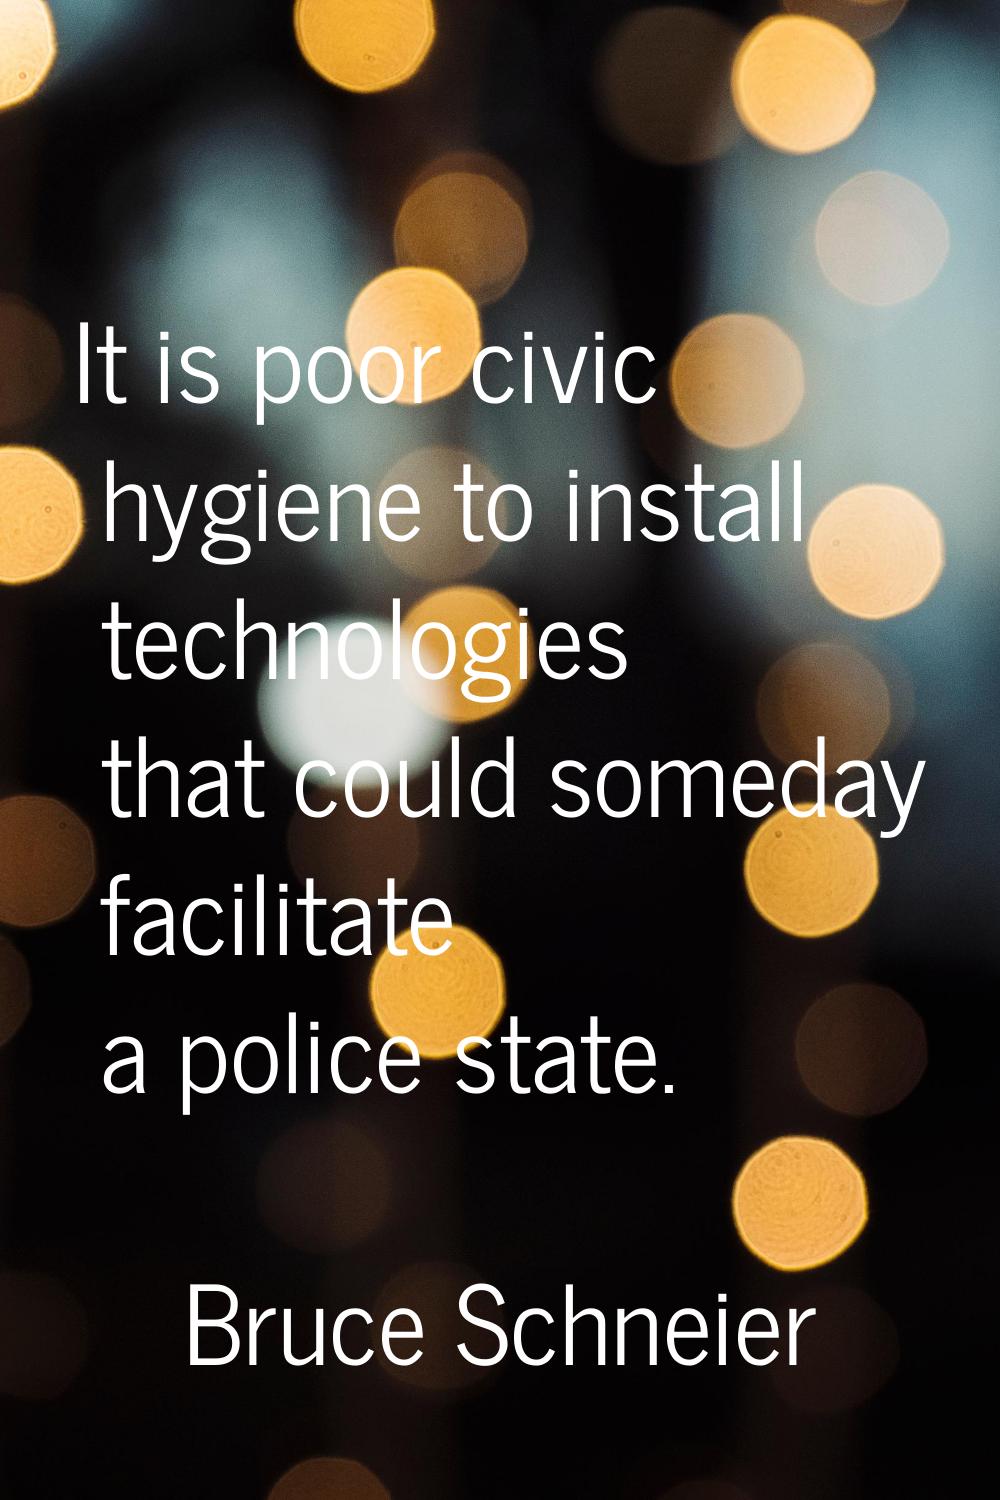 It is poor civic hygiene to install technologies that could someday facilitate a police state.